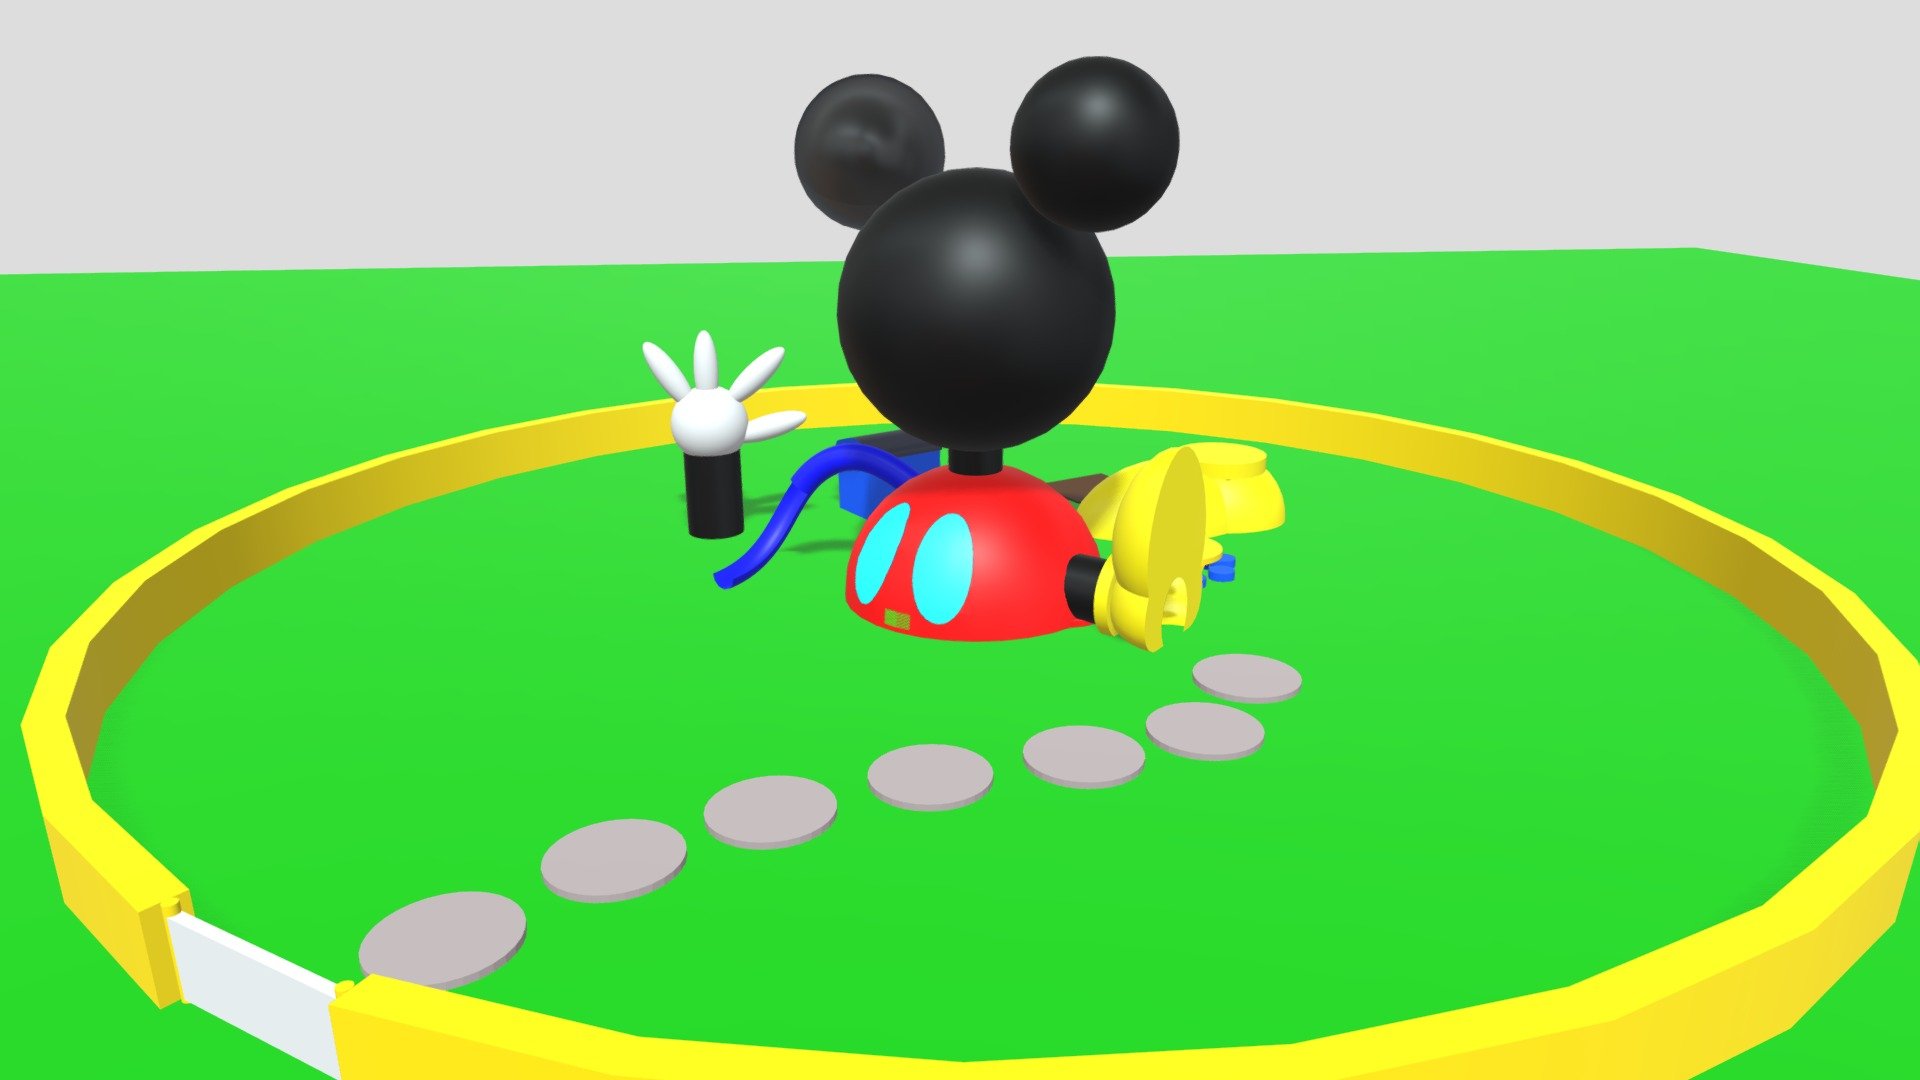 Mickey Mouse Clubhouse, Learn to Count to 10